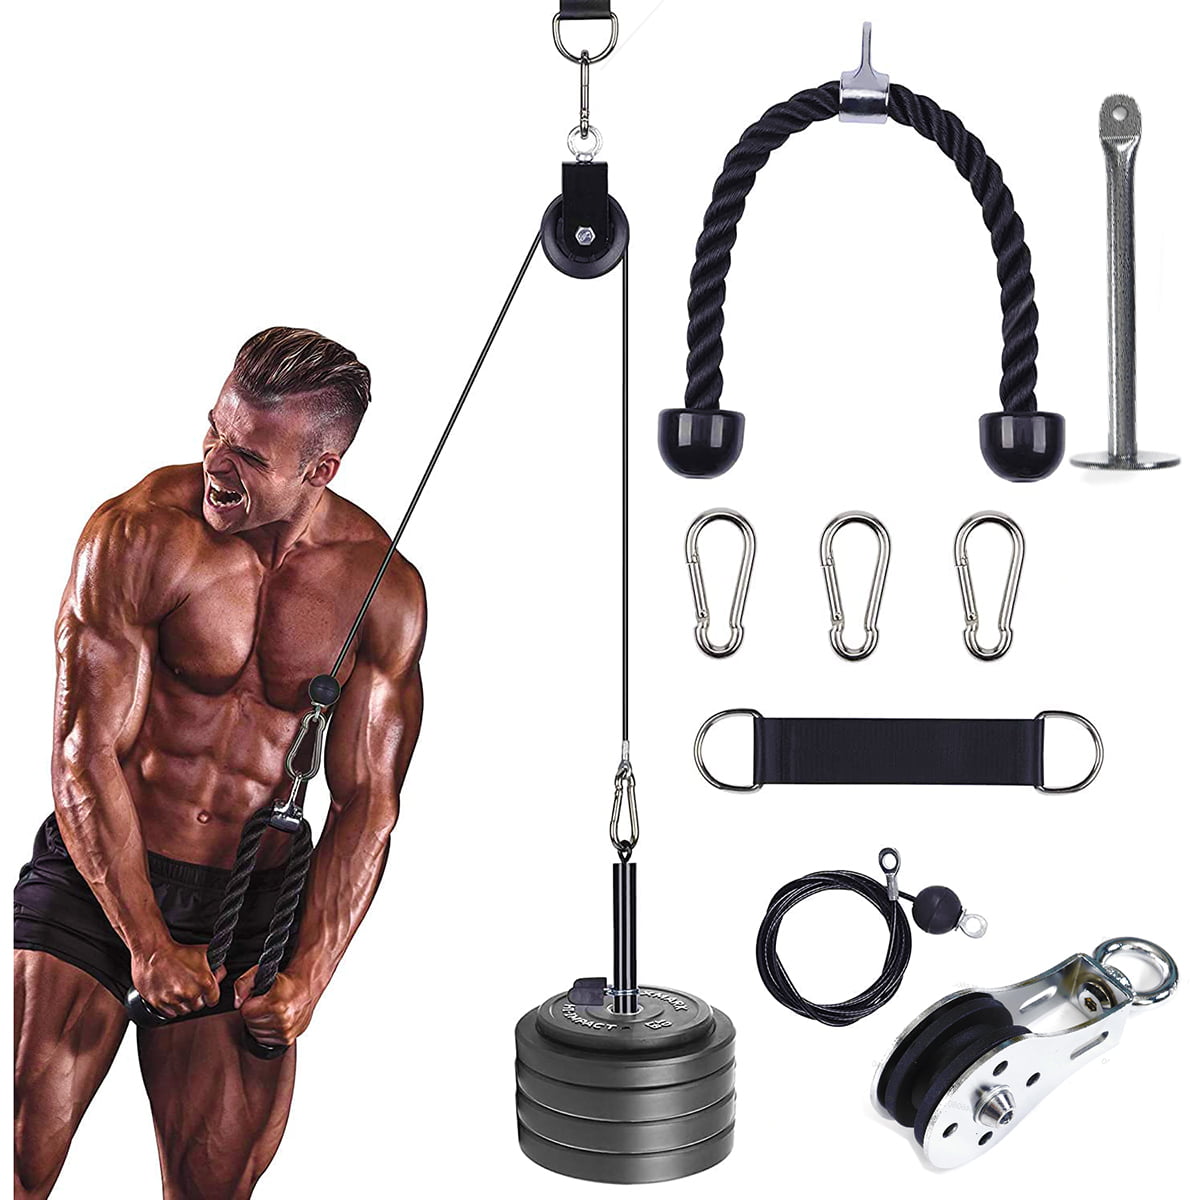 D-Ring Pull Up Handle Rope Cable Home Workout Fitness Gym Muscle Triceps Train 